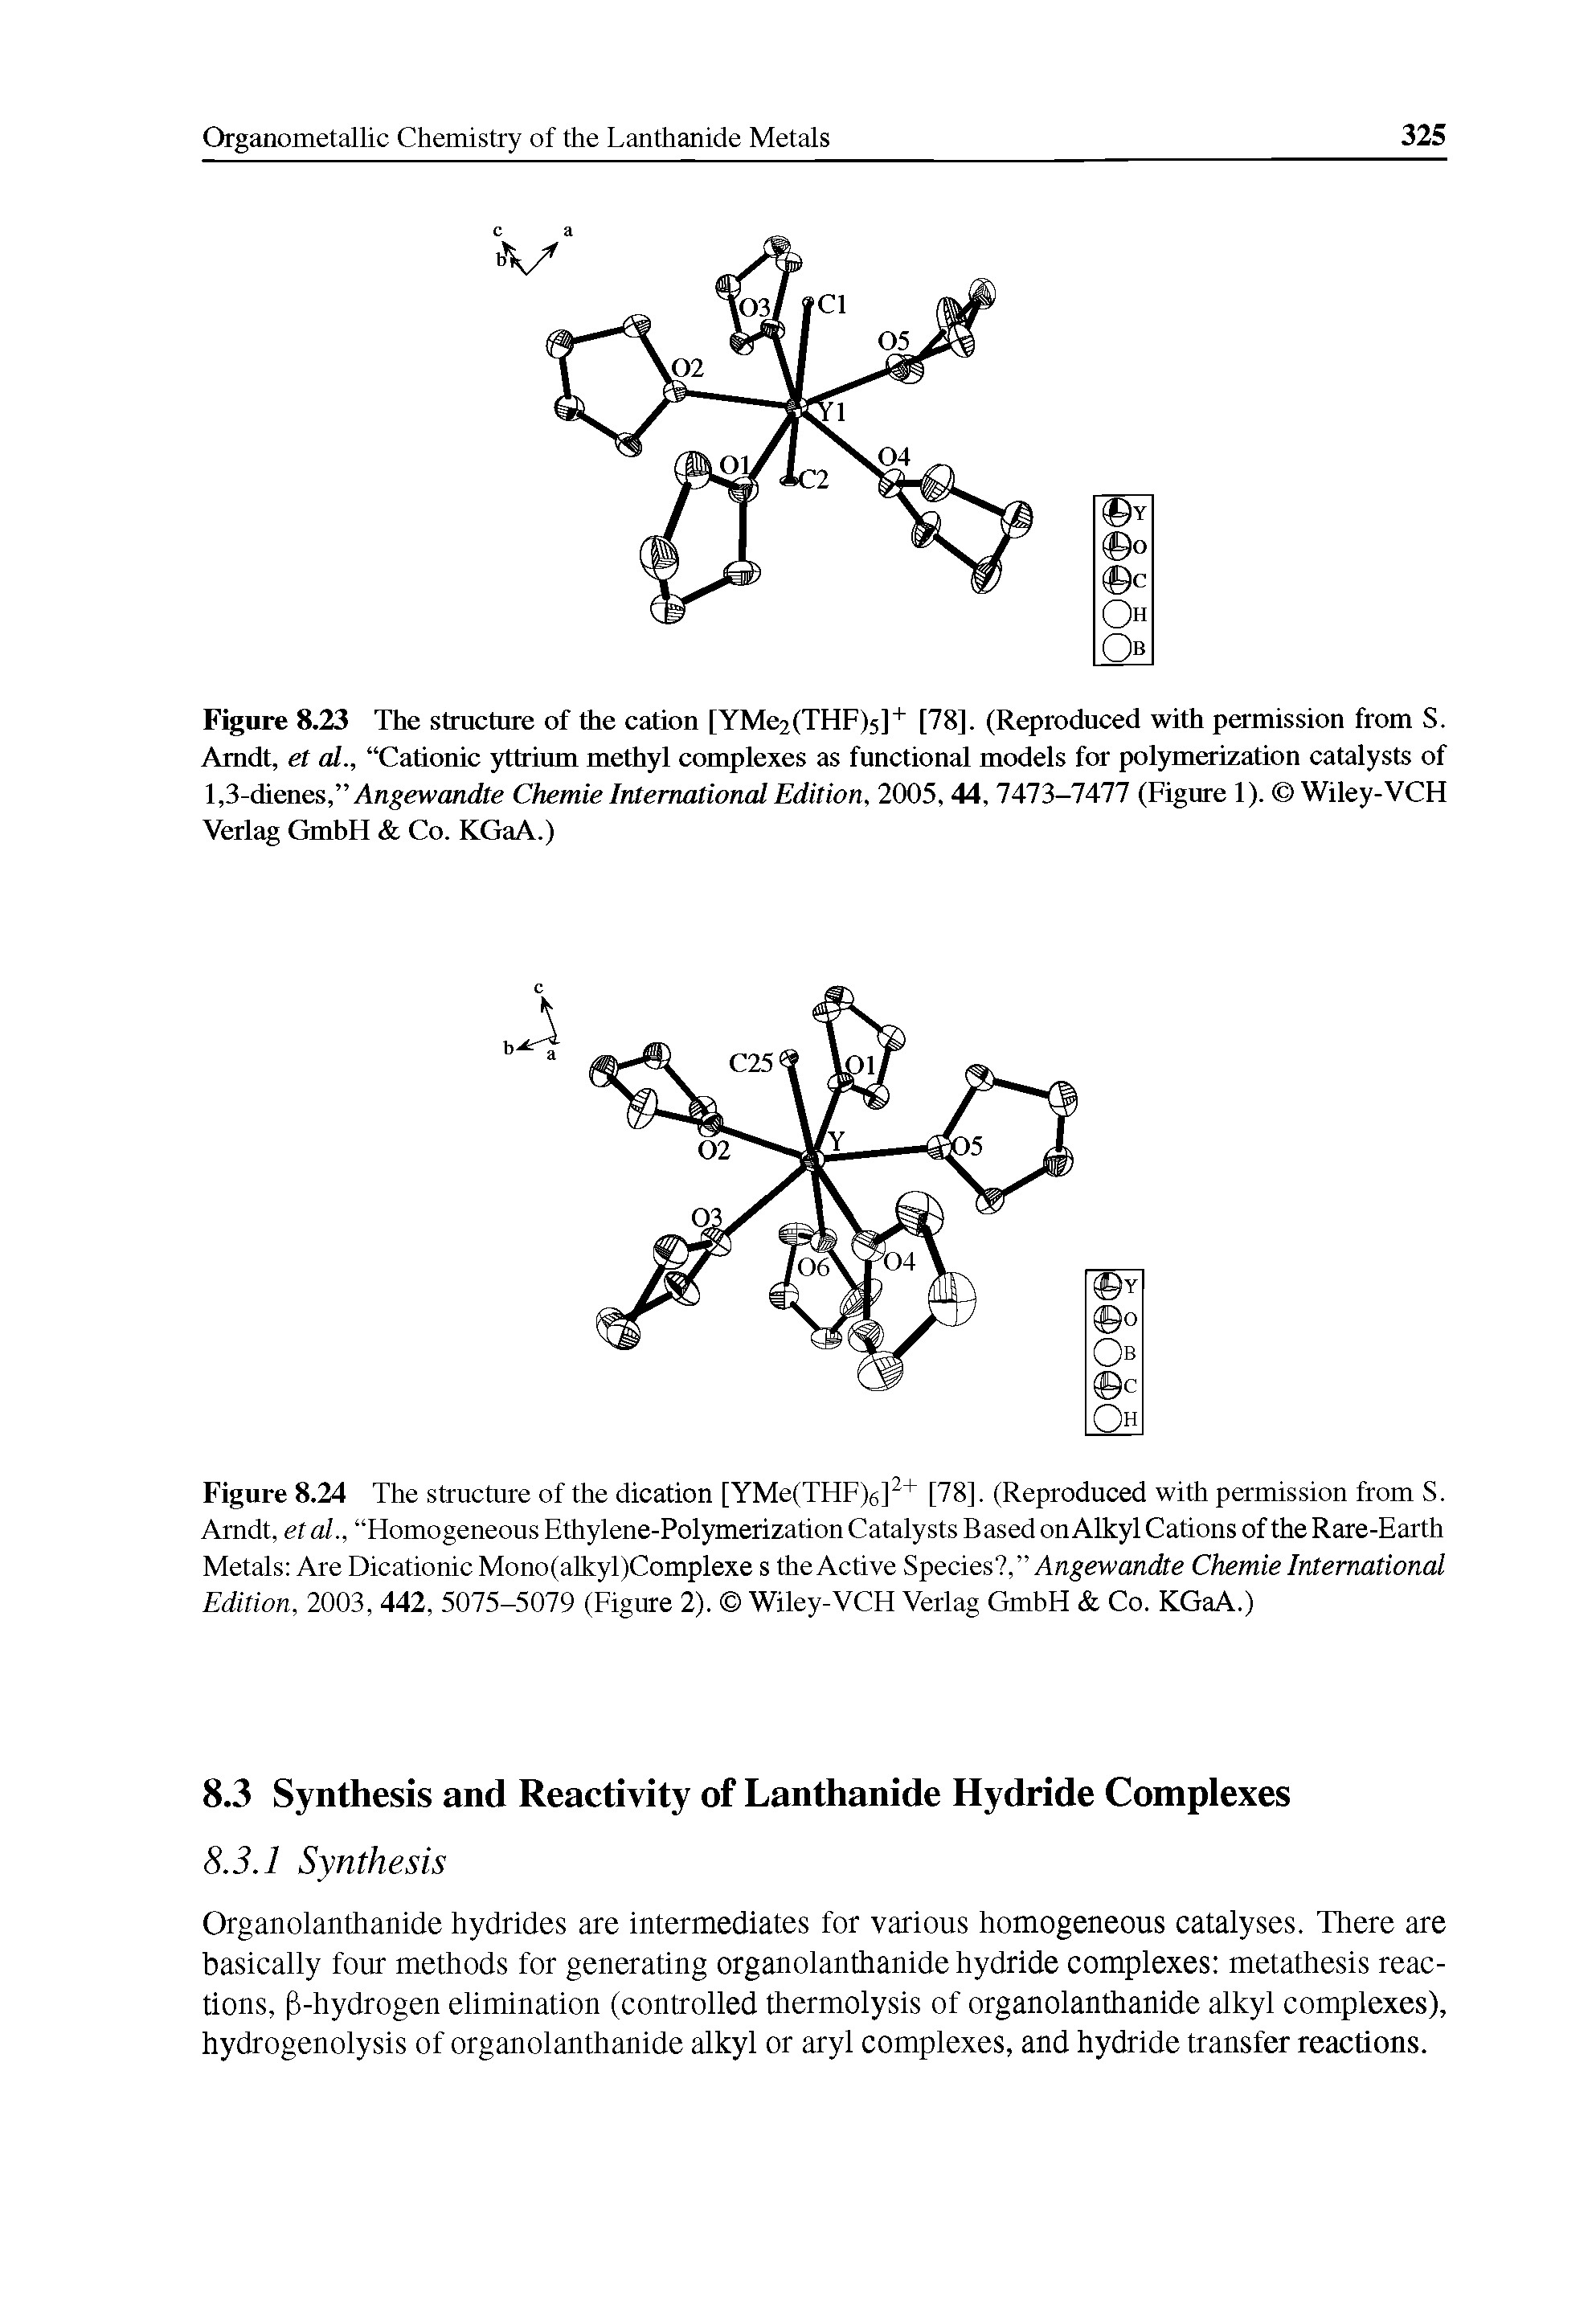 Figure 8.24 The structure of the dication [YMe(THF)6] + [78]. (Reproduced with permission from S. Arndt, etal., Homogeneous Ethylene-Polymerization Catalysts Based on Alkyl Cations of the Rare-Earth Metals Are Dicationic Mono(aUcyl)Complexe s the Active Species , Angewanrffe Chemie International Edition, 2003, 442, 5075-5079 (Eigure 2). Wiley-VCH Verlag GmbH Co. KGaA.)...